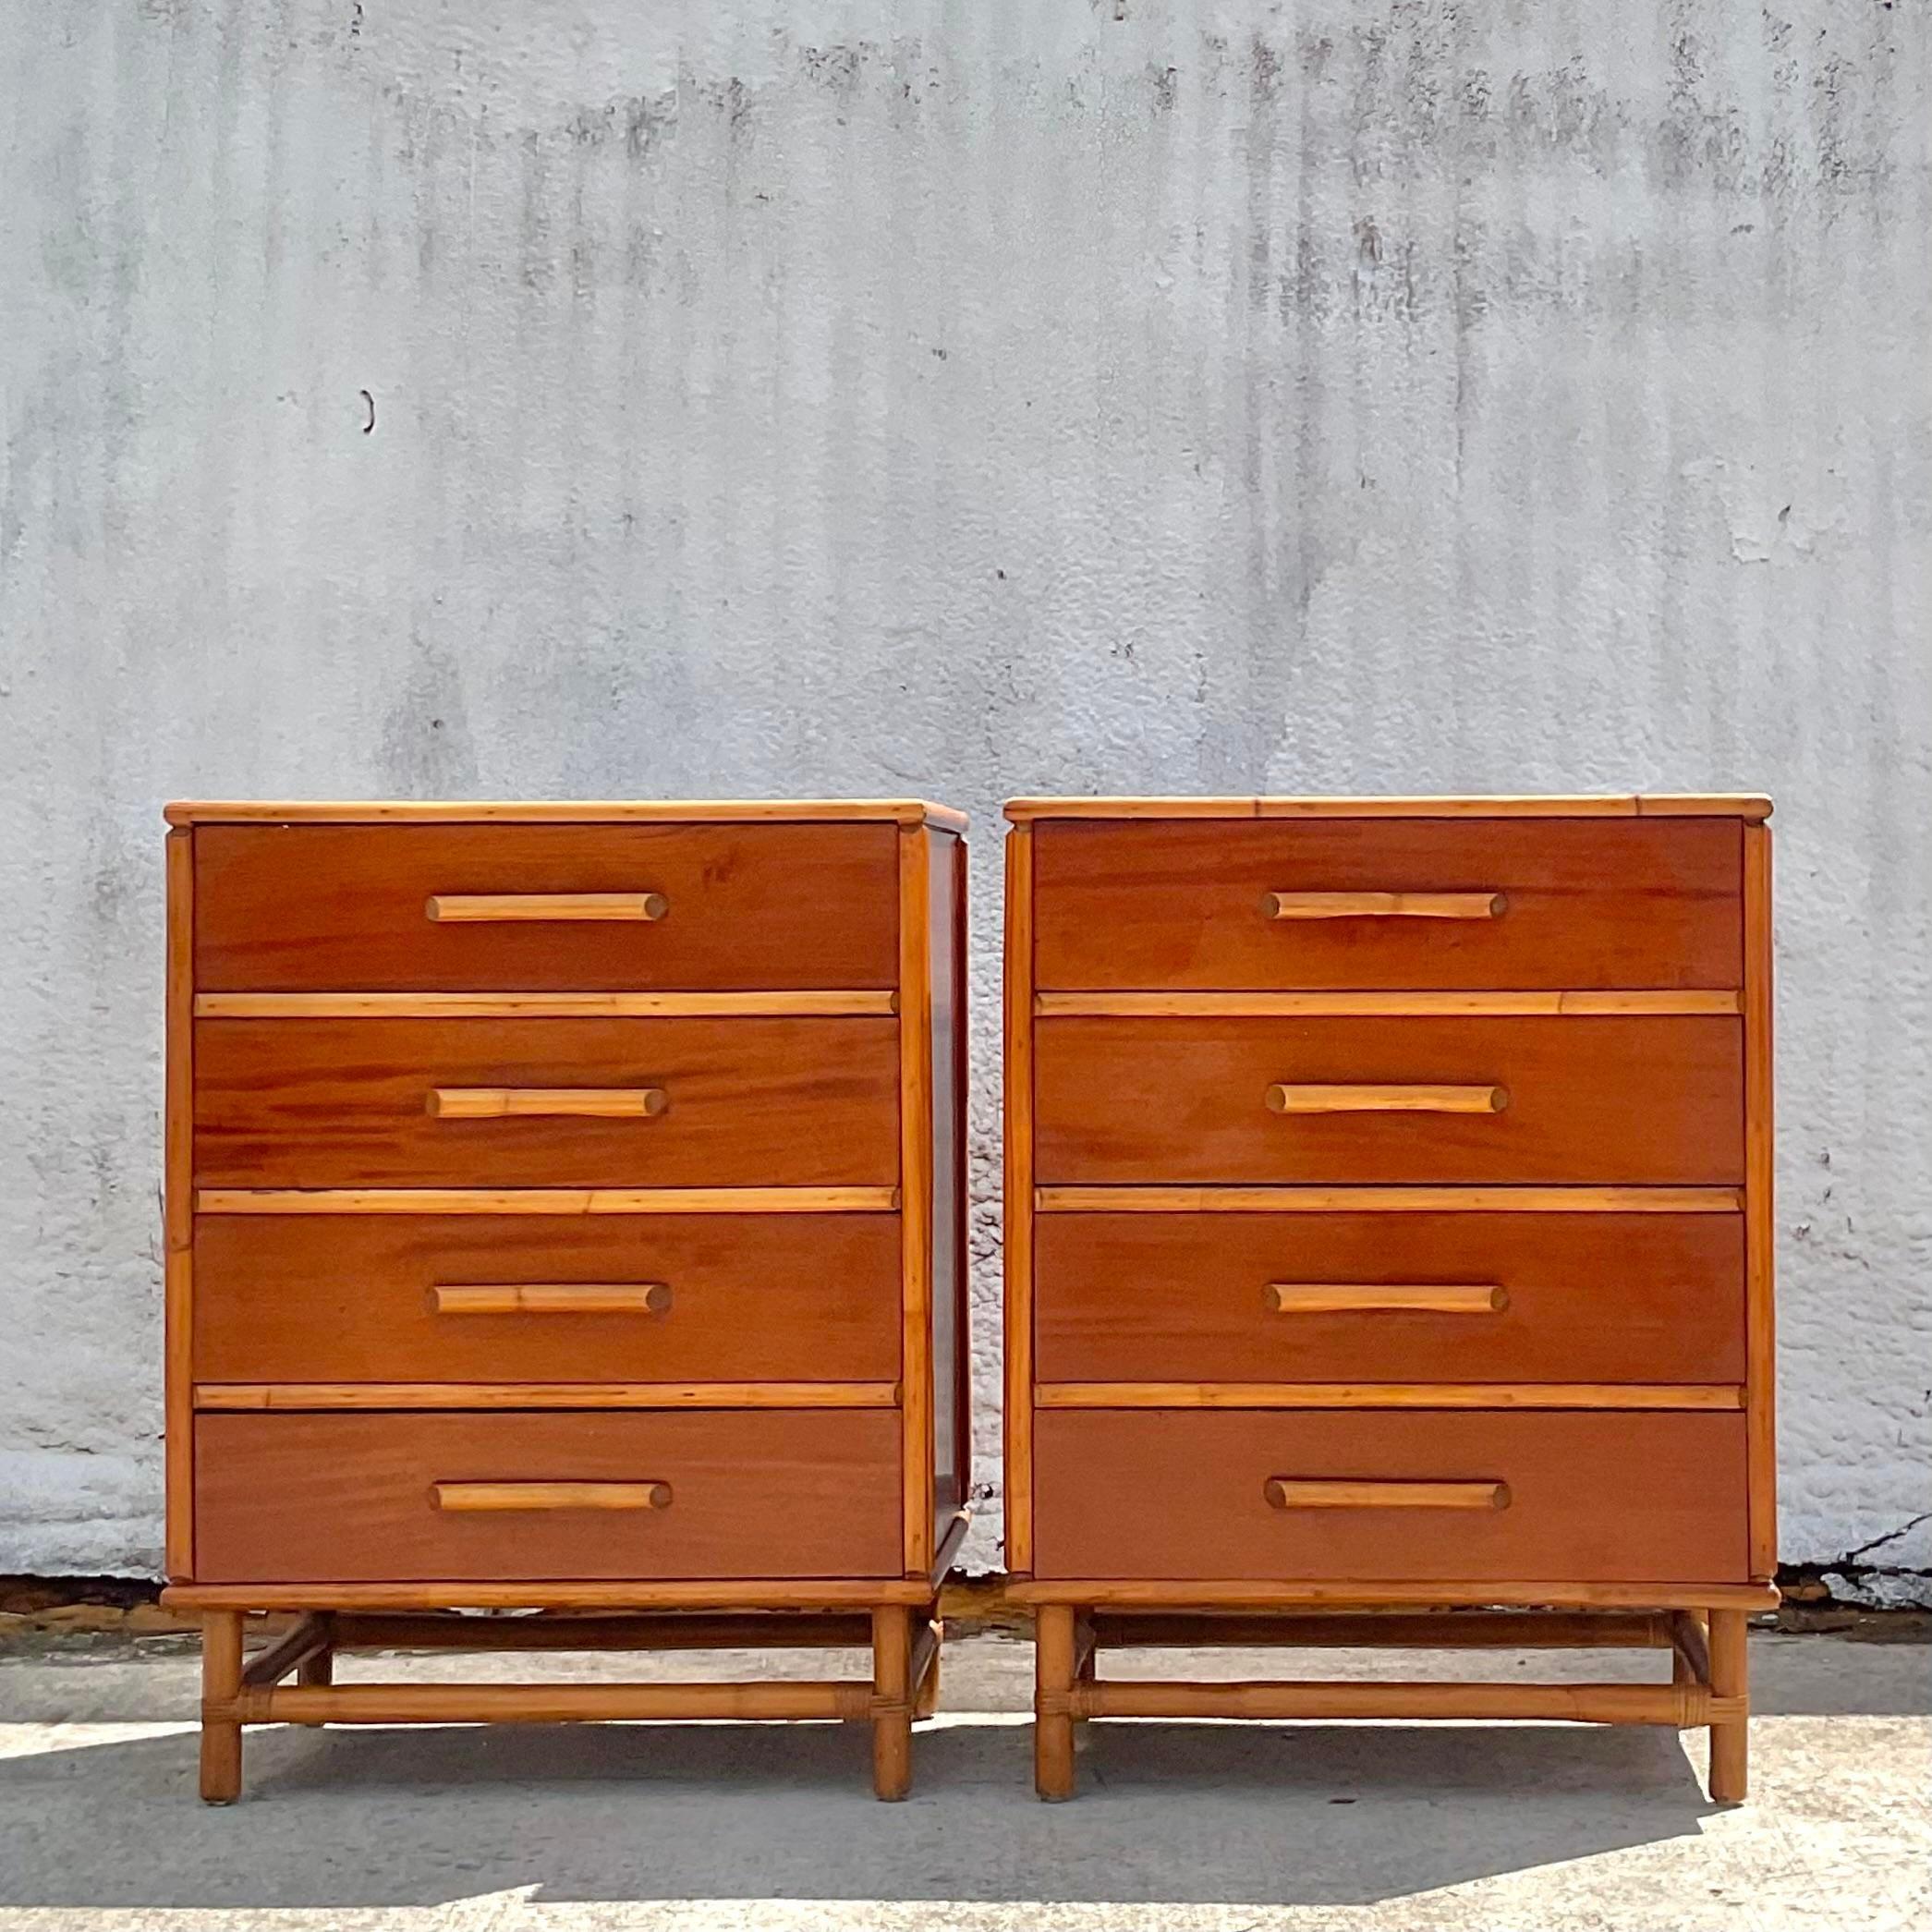 An exceptional pair of vintage 1950s Coastal chest of drawers. Beautiful and tall Mahogany cabinets with rattan trim. Chis brass caps on the ends. Matching dresser also available on my Chairish page. Acquired from a Palm Beach estate.